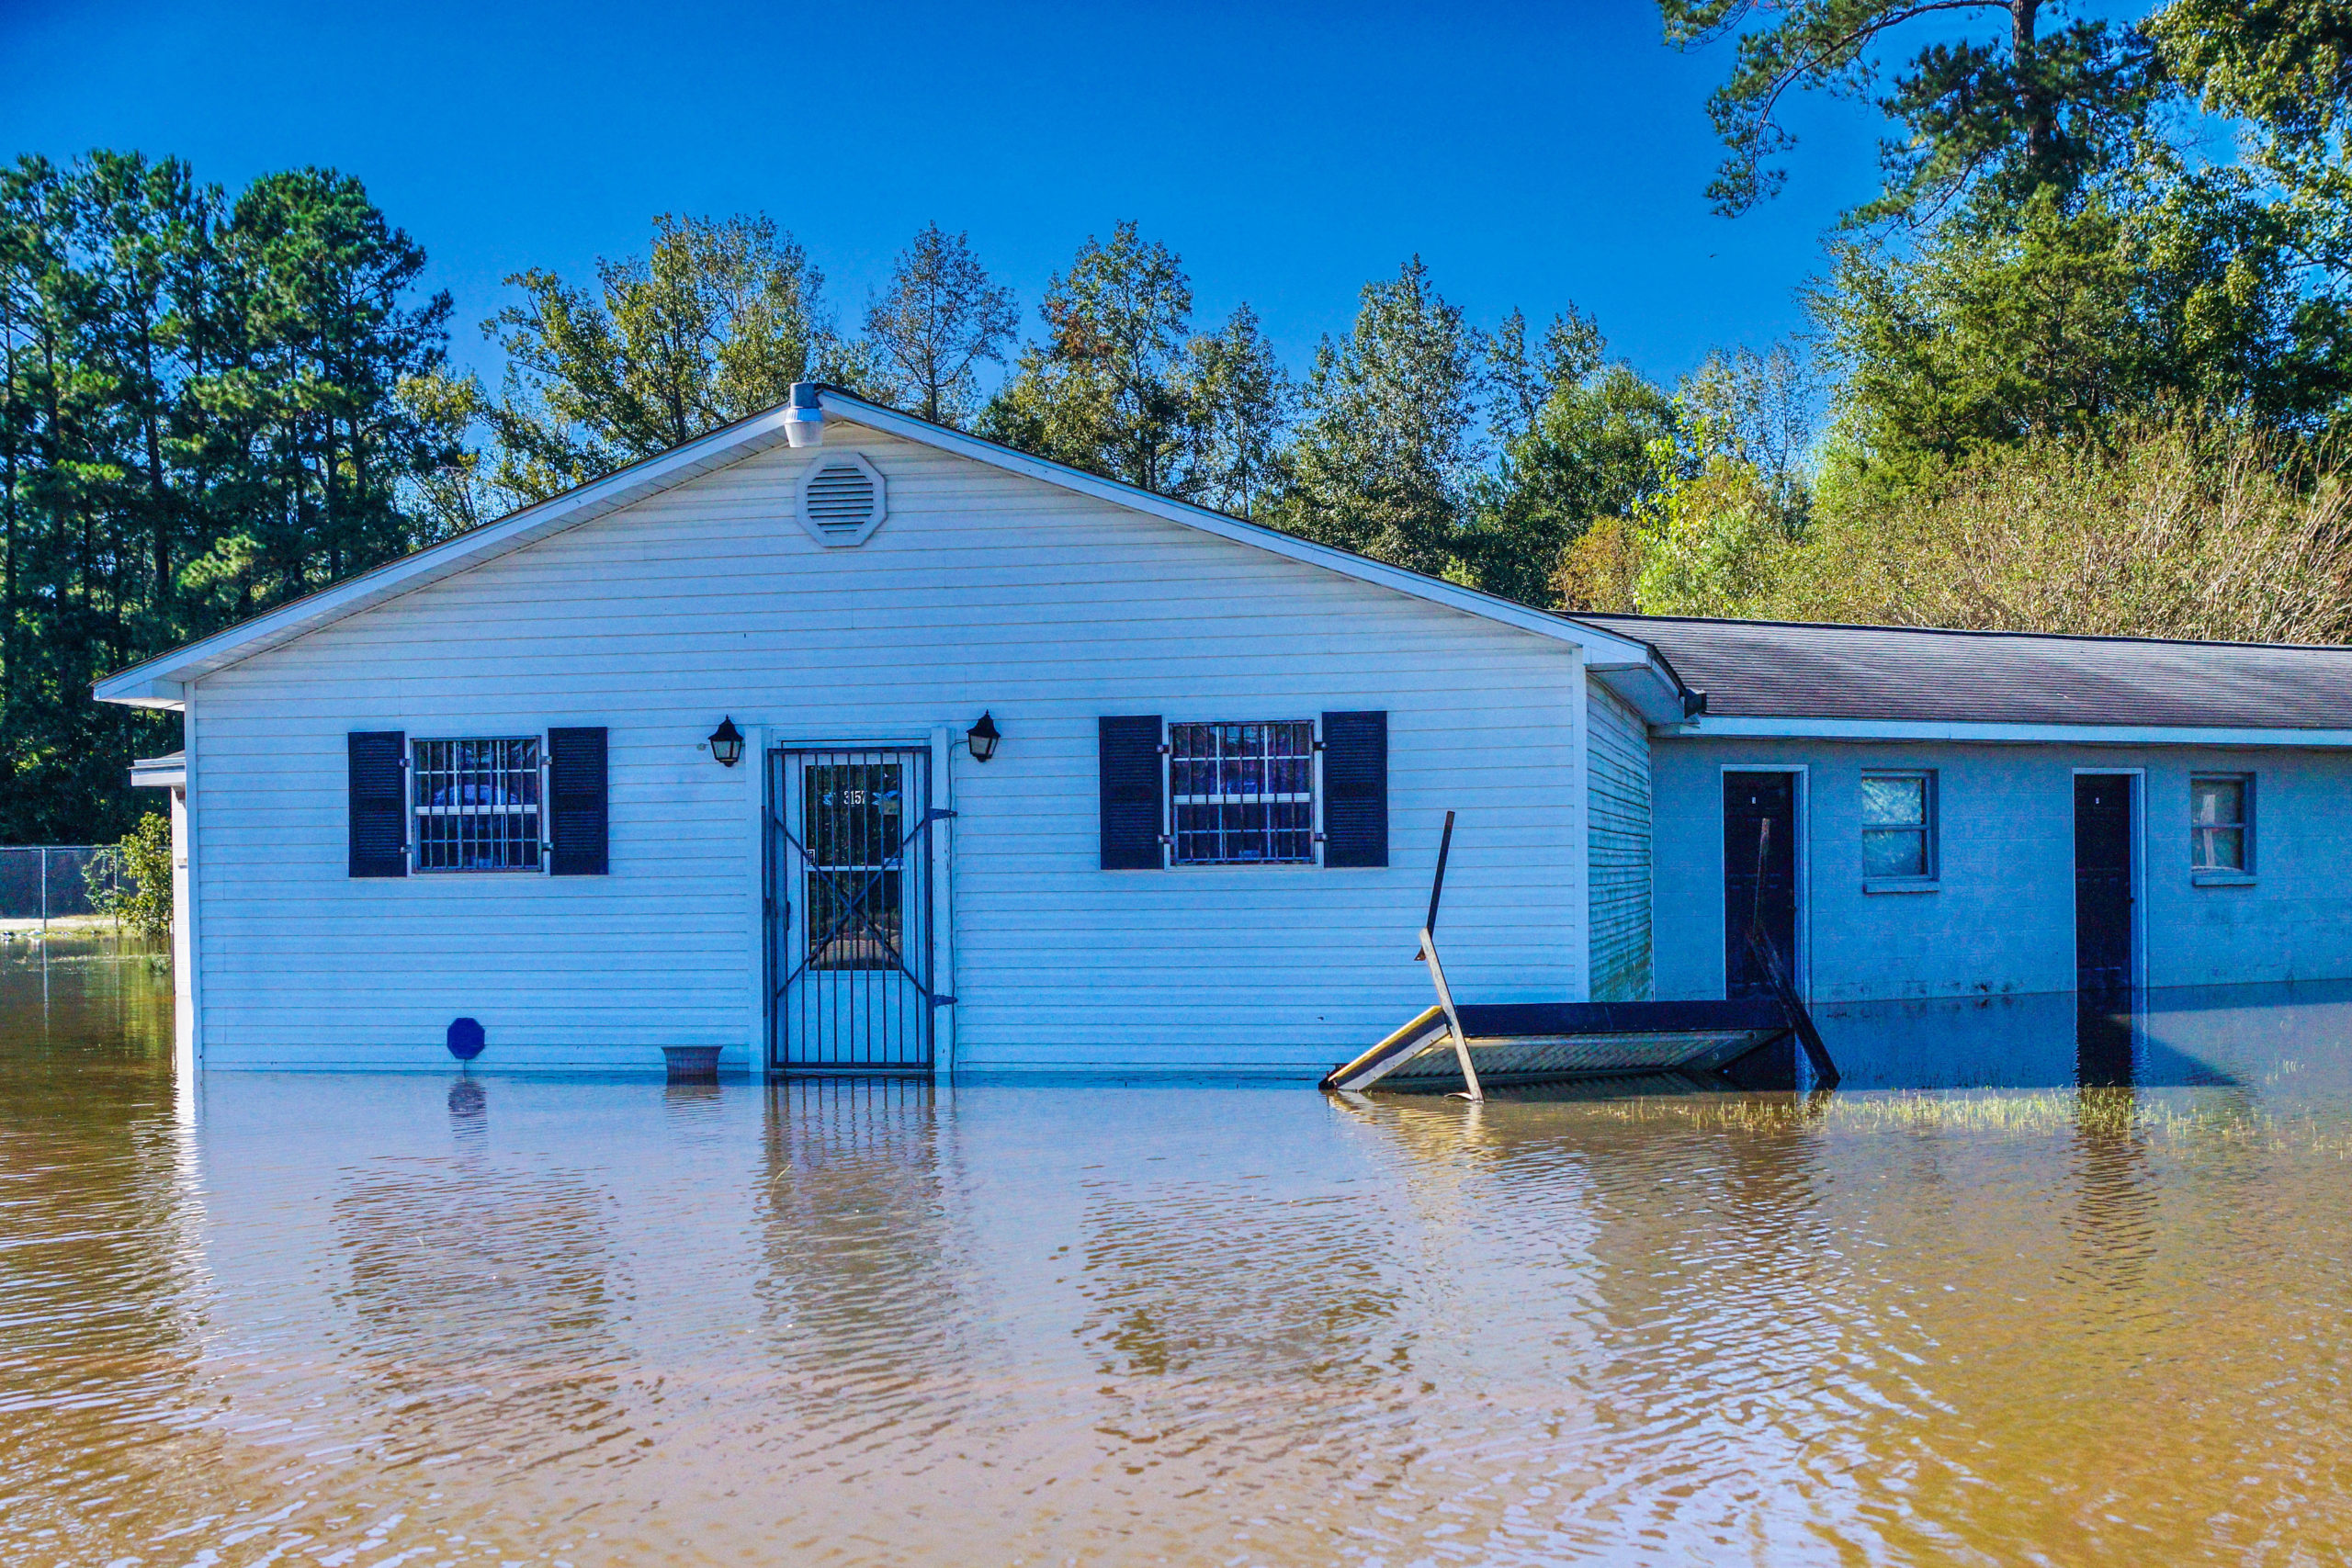 Protect your home and family from flooding - Flooding can cause considerable distress, uproot families and damage structures. But even people who live in flood zones can take steps to be flood-safe.